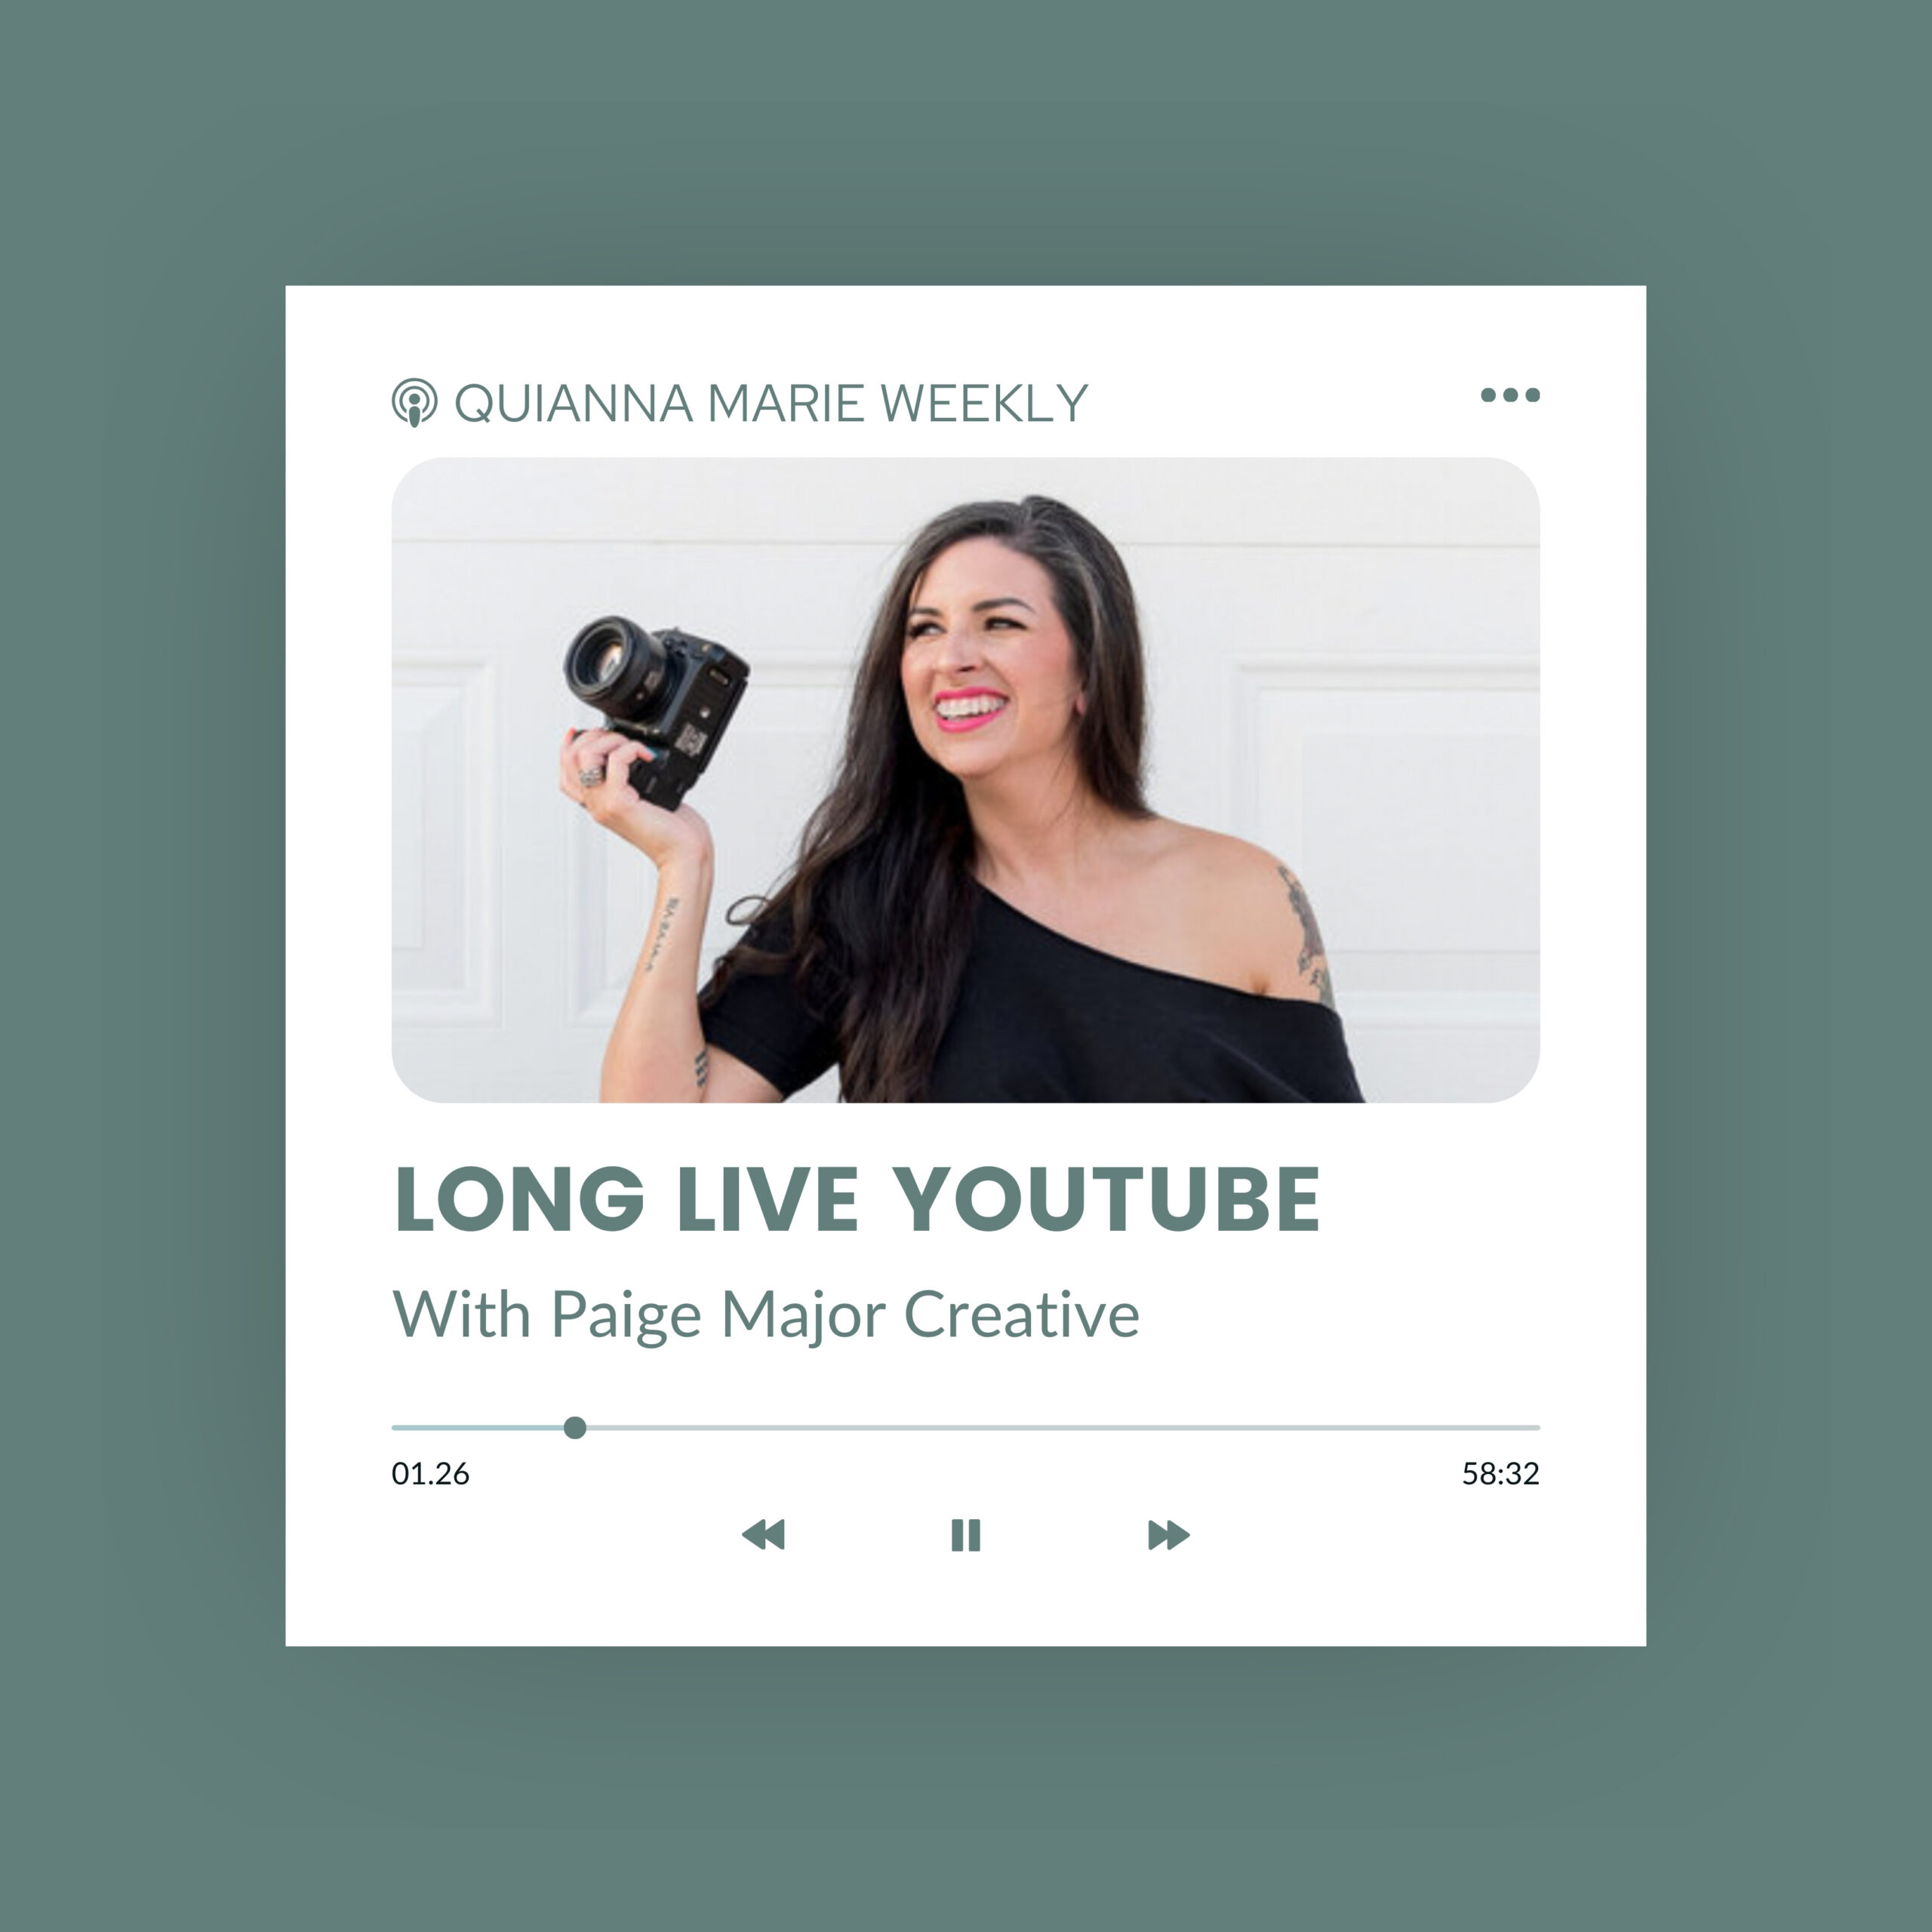 Youtube Marketing For Your Business with Paige Major and Quianna Marie